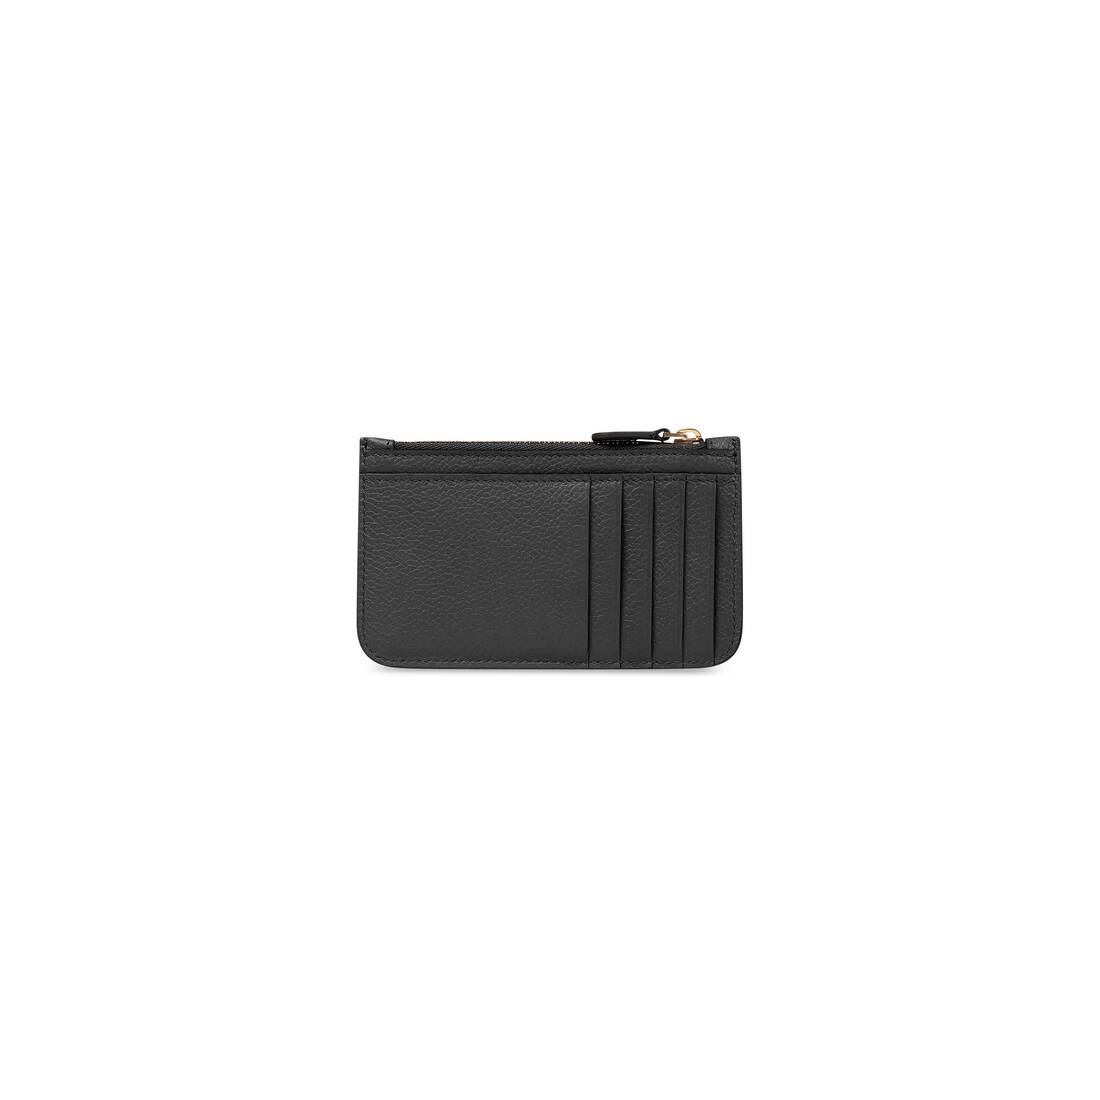 Women's Cash Large Long Coin And Card Holder in Black - 2